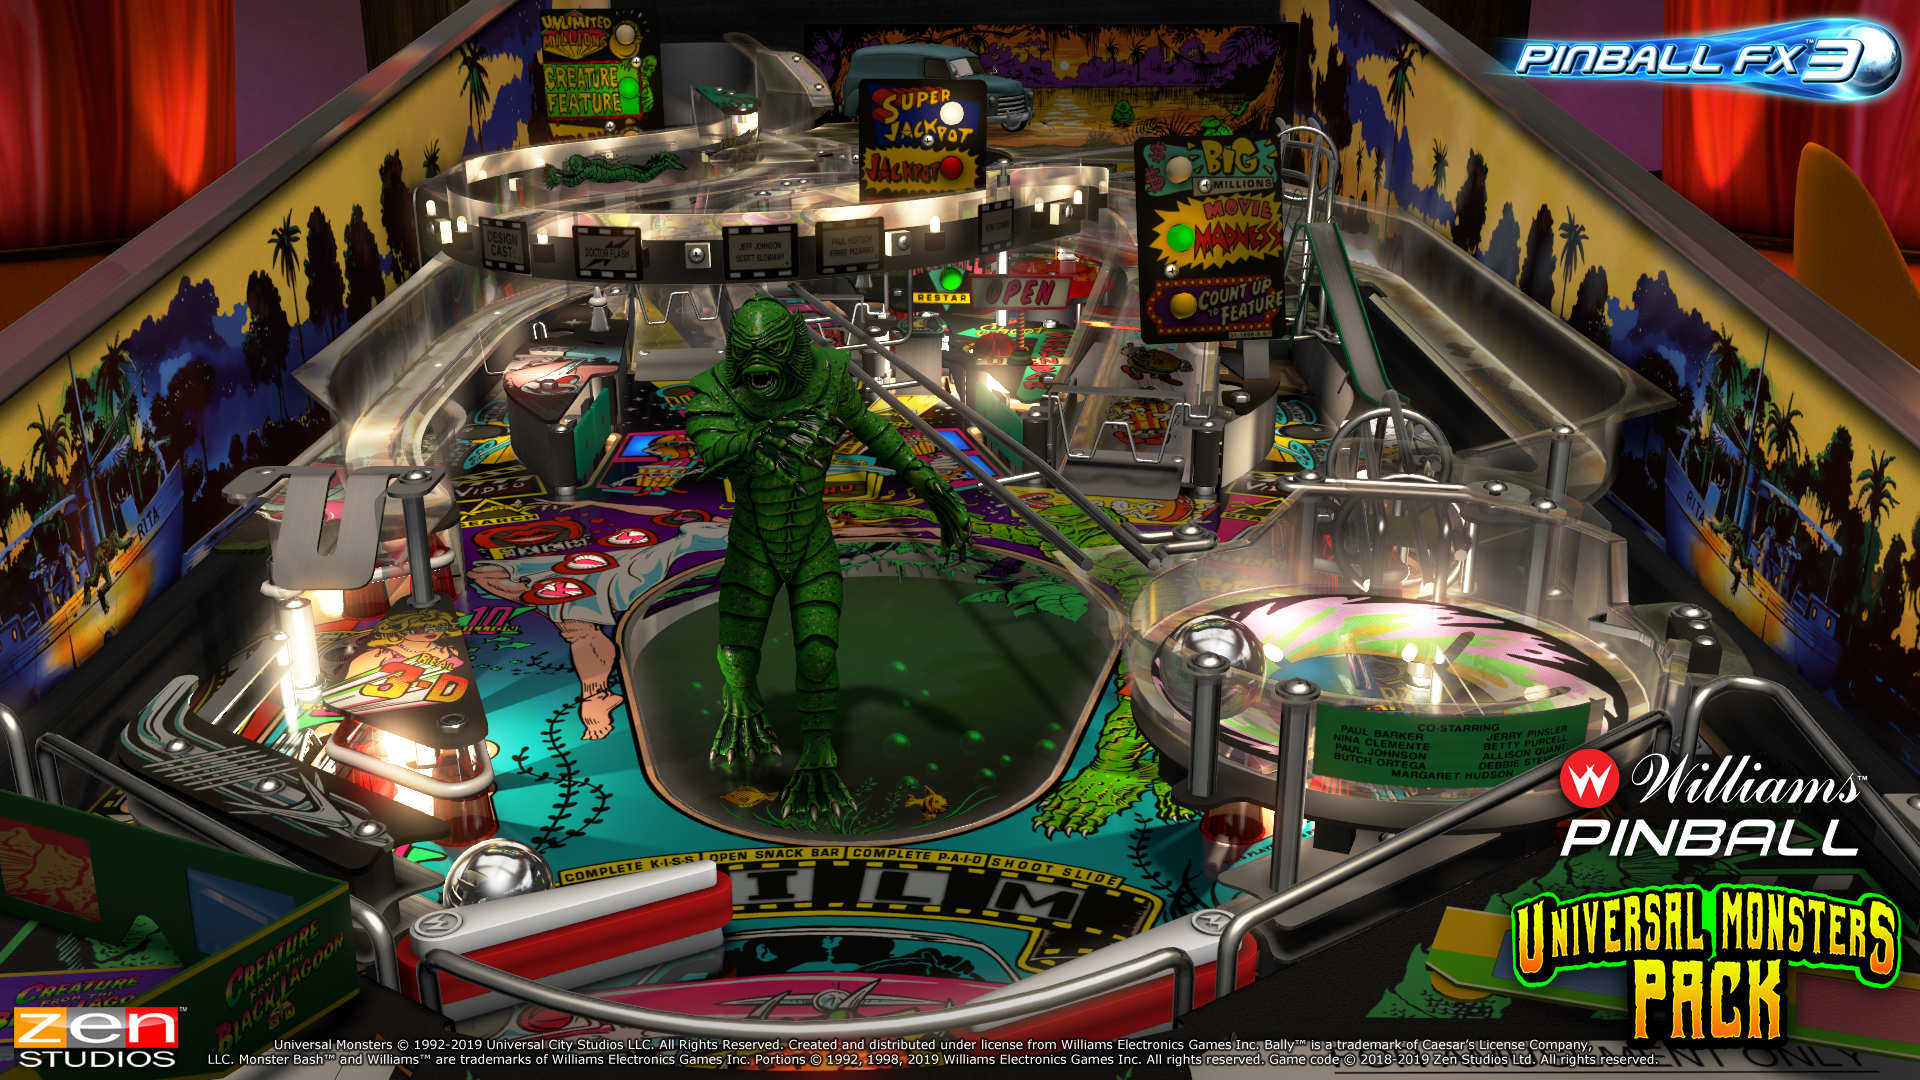 Classic Universal Monsters Scare Up Dlc For Pinball Fx3 And Williams Pinball Horrorbuzz